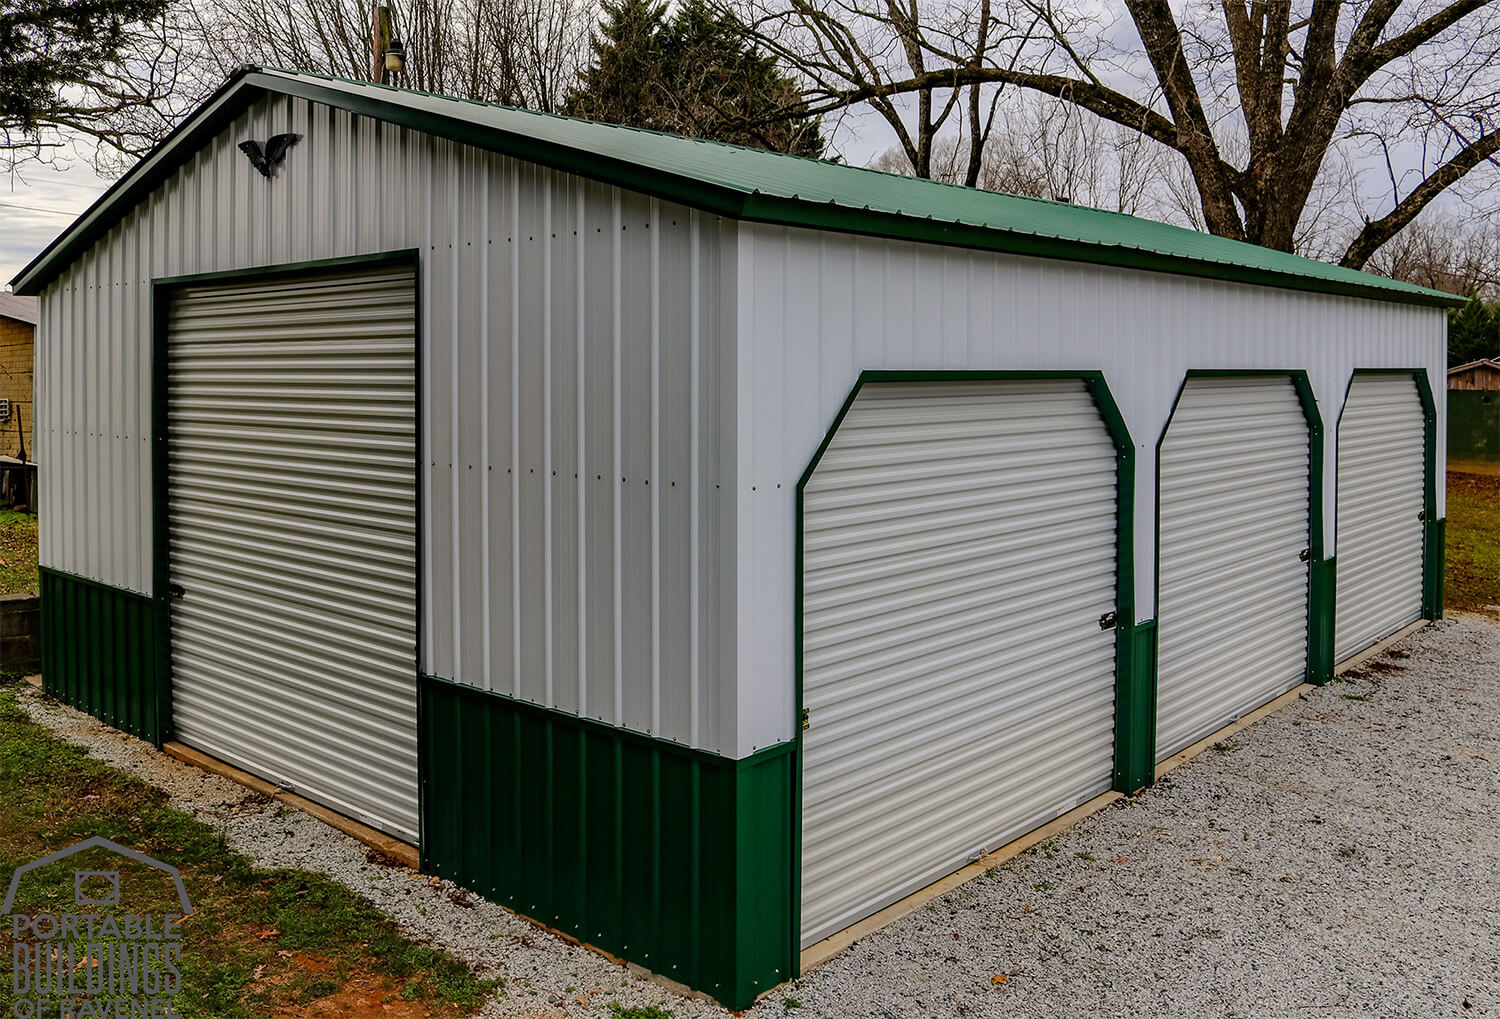 Considerations to Make When Buying a Shed